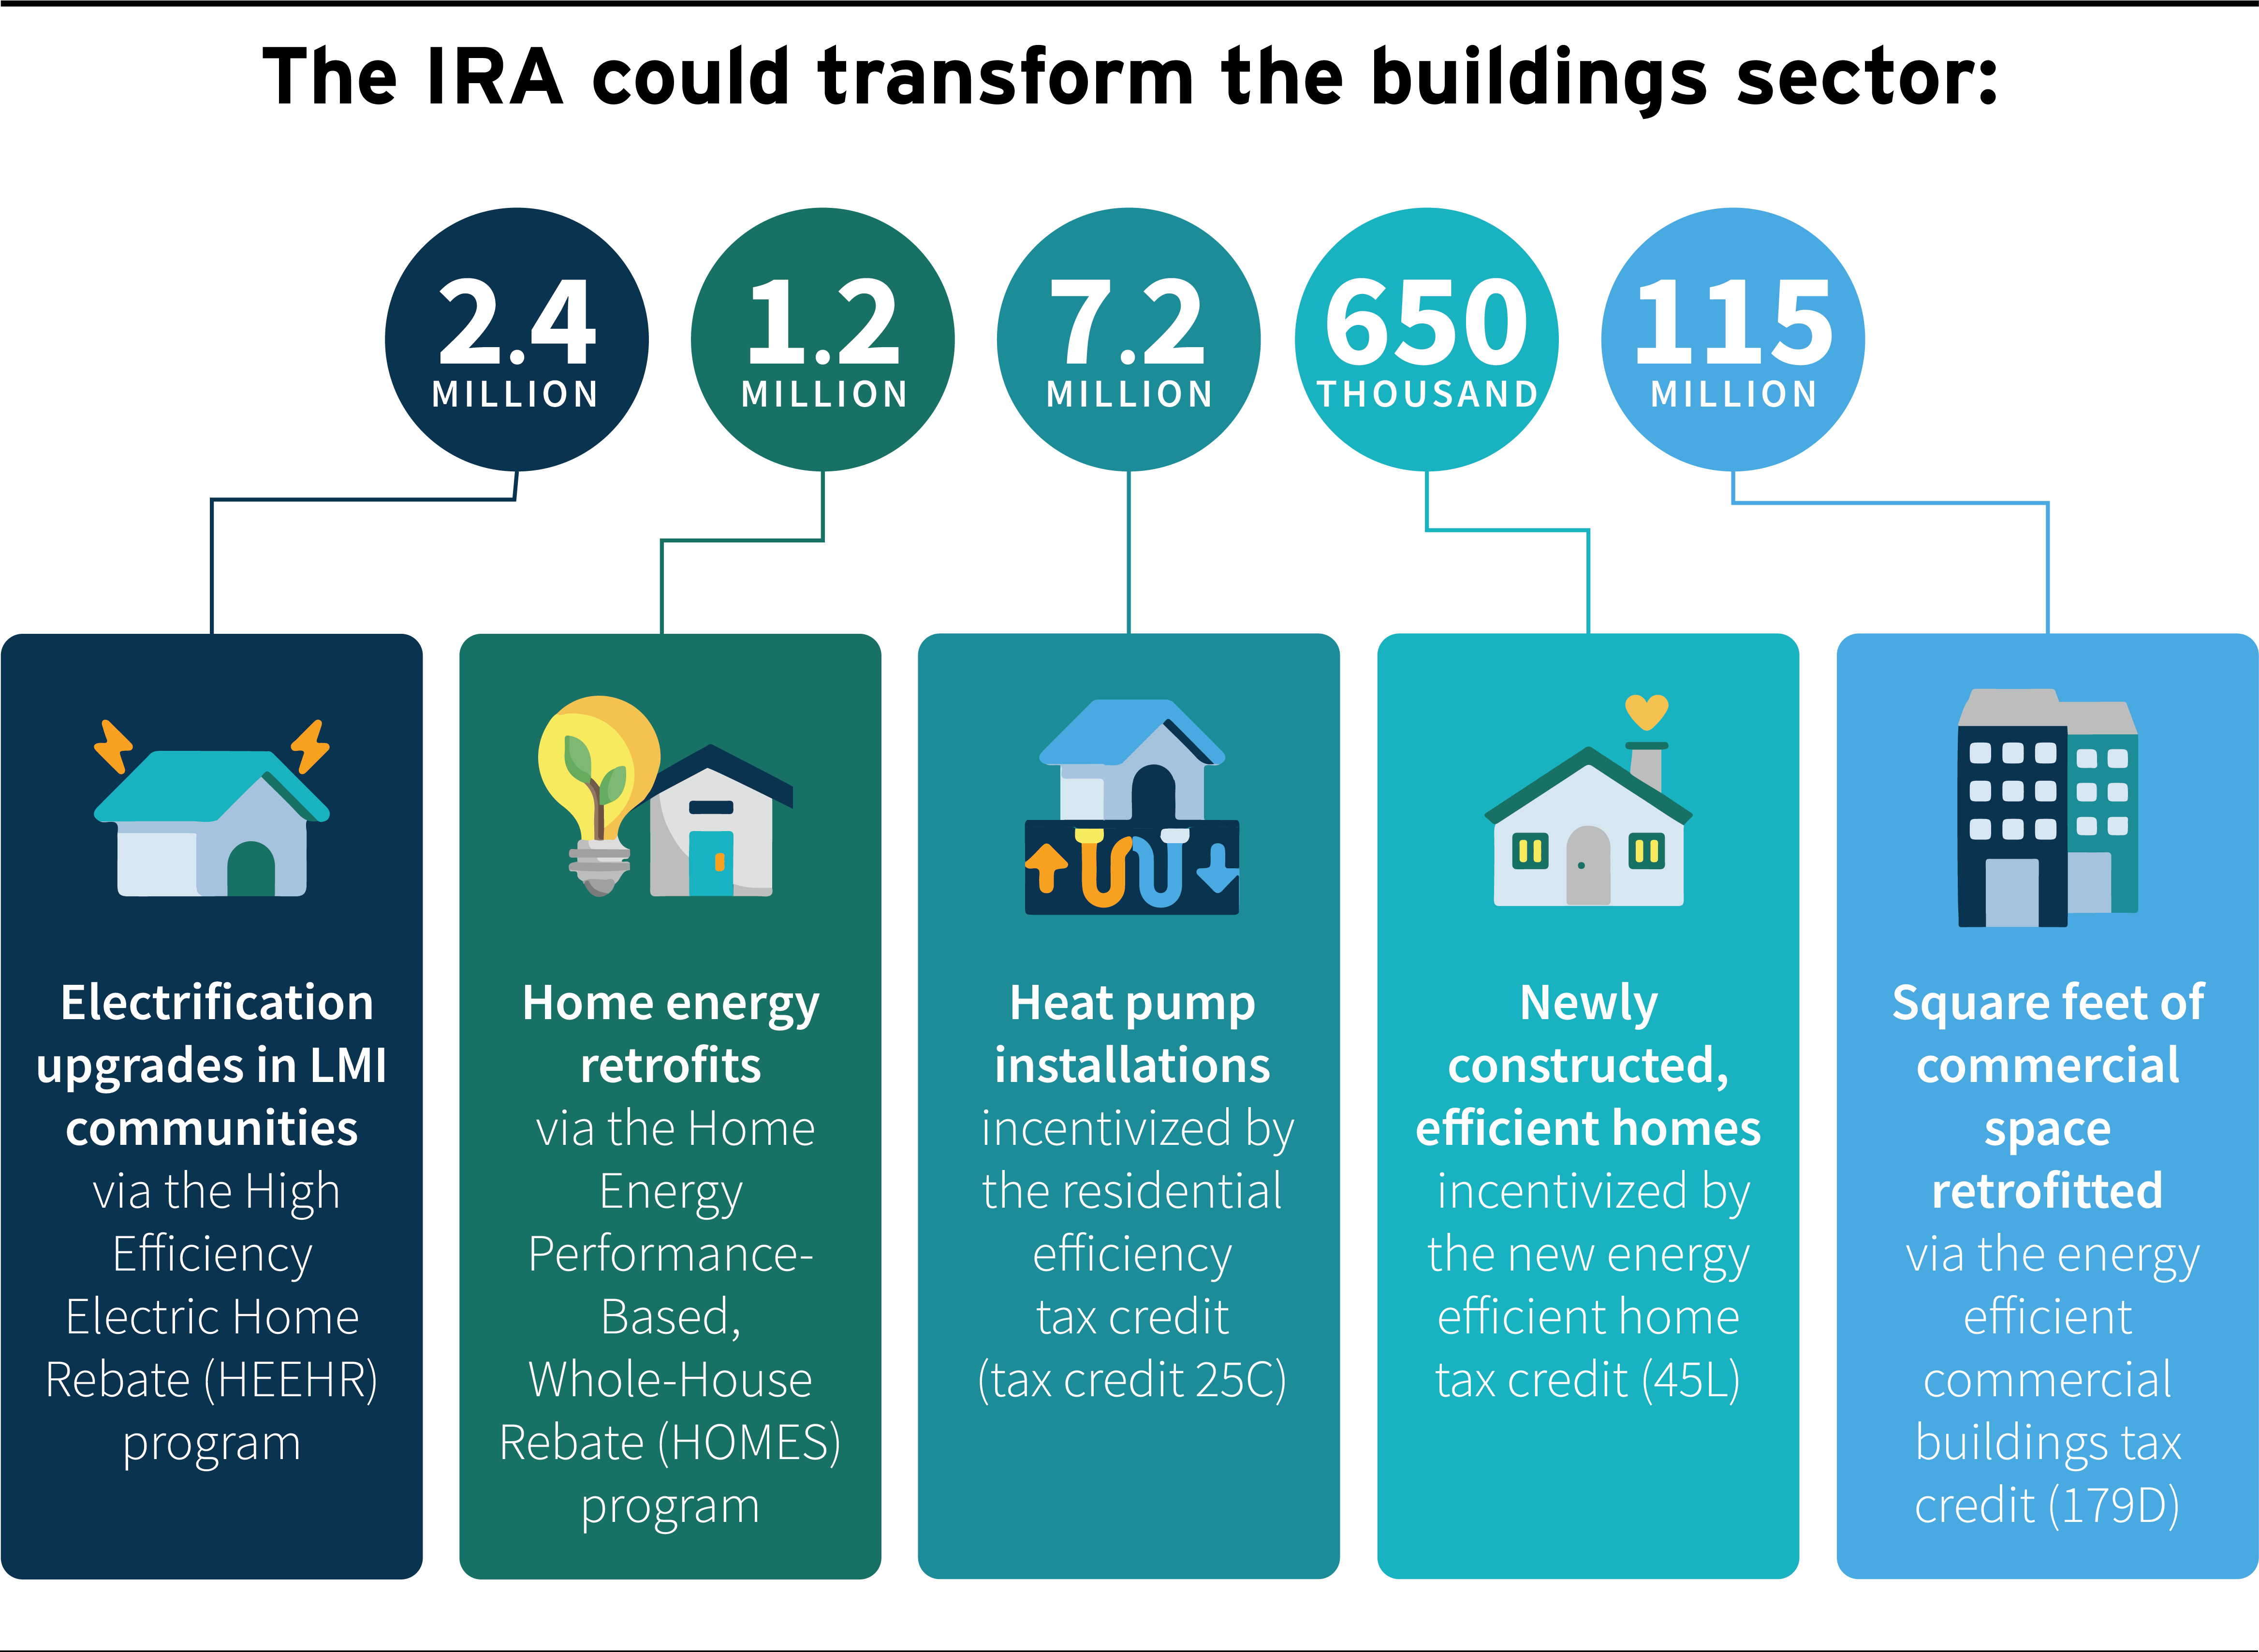 IRA Seeks to Transform the Building Sector